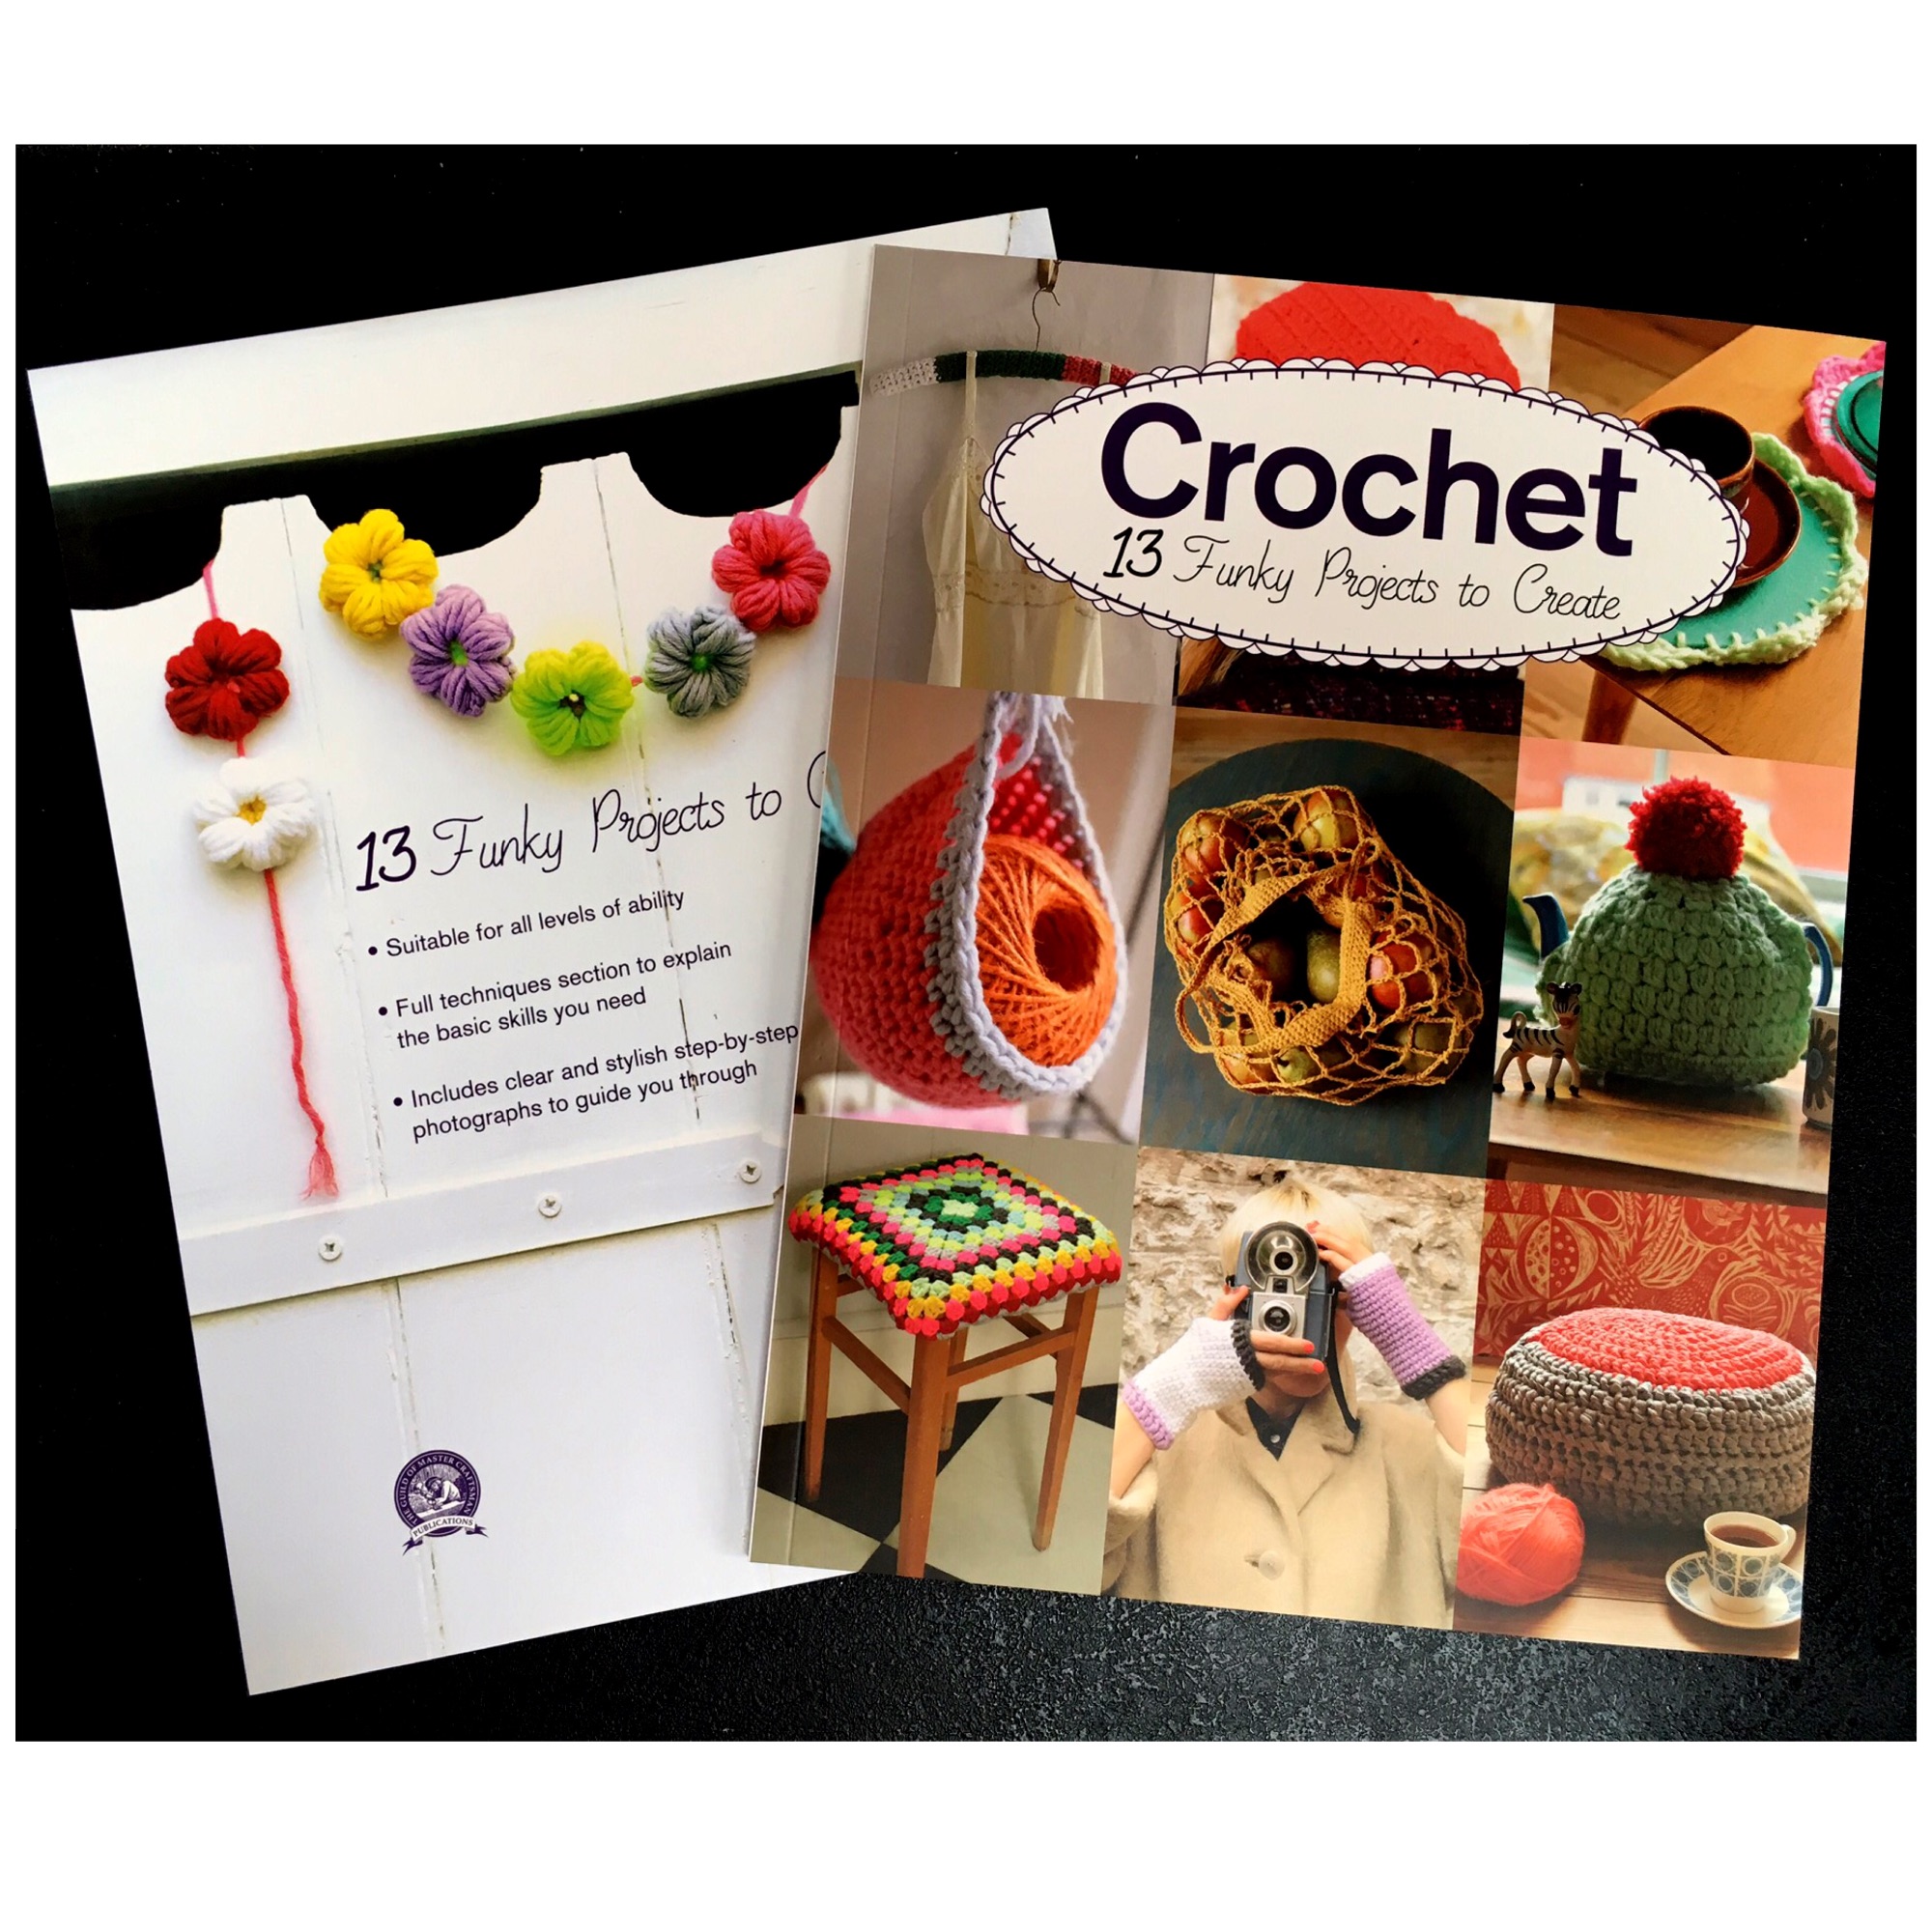 Gmc Crochet 13 funky projects to create Claire Culley Amy Phipps boklet